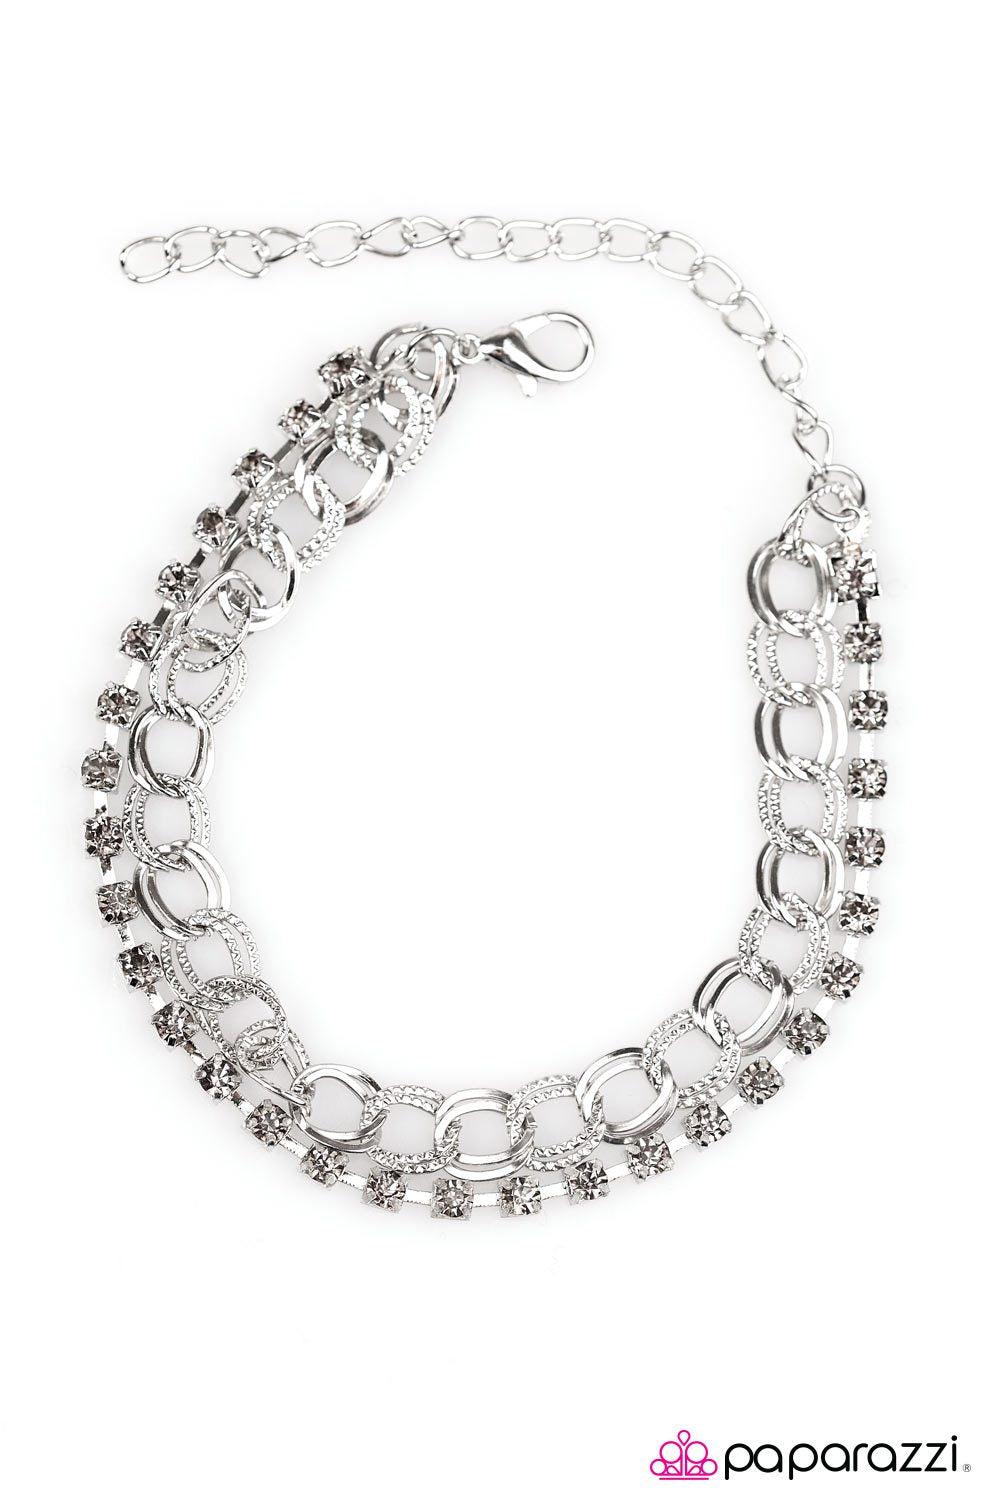 Double Time Silver Bracelet - Paparazzi Accessories-CarasShop.com - $5 Jewelry by Cara Jewels